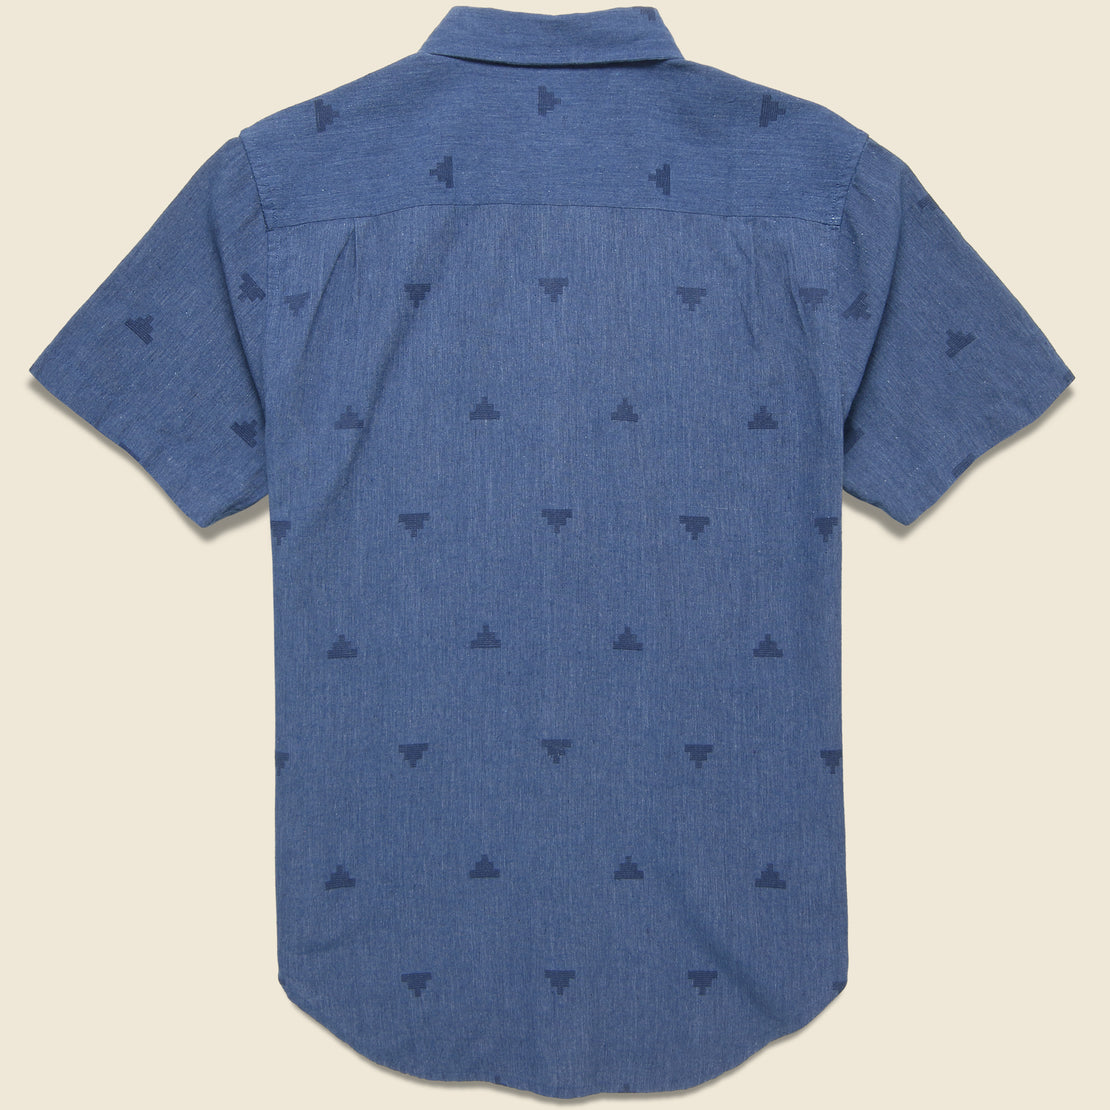 Malcolm Shirt - Navy Fil Coupe Pyramids - Bridge & Burn - STAG Provisions - Tops - S/S Woven - Other Pattern